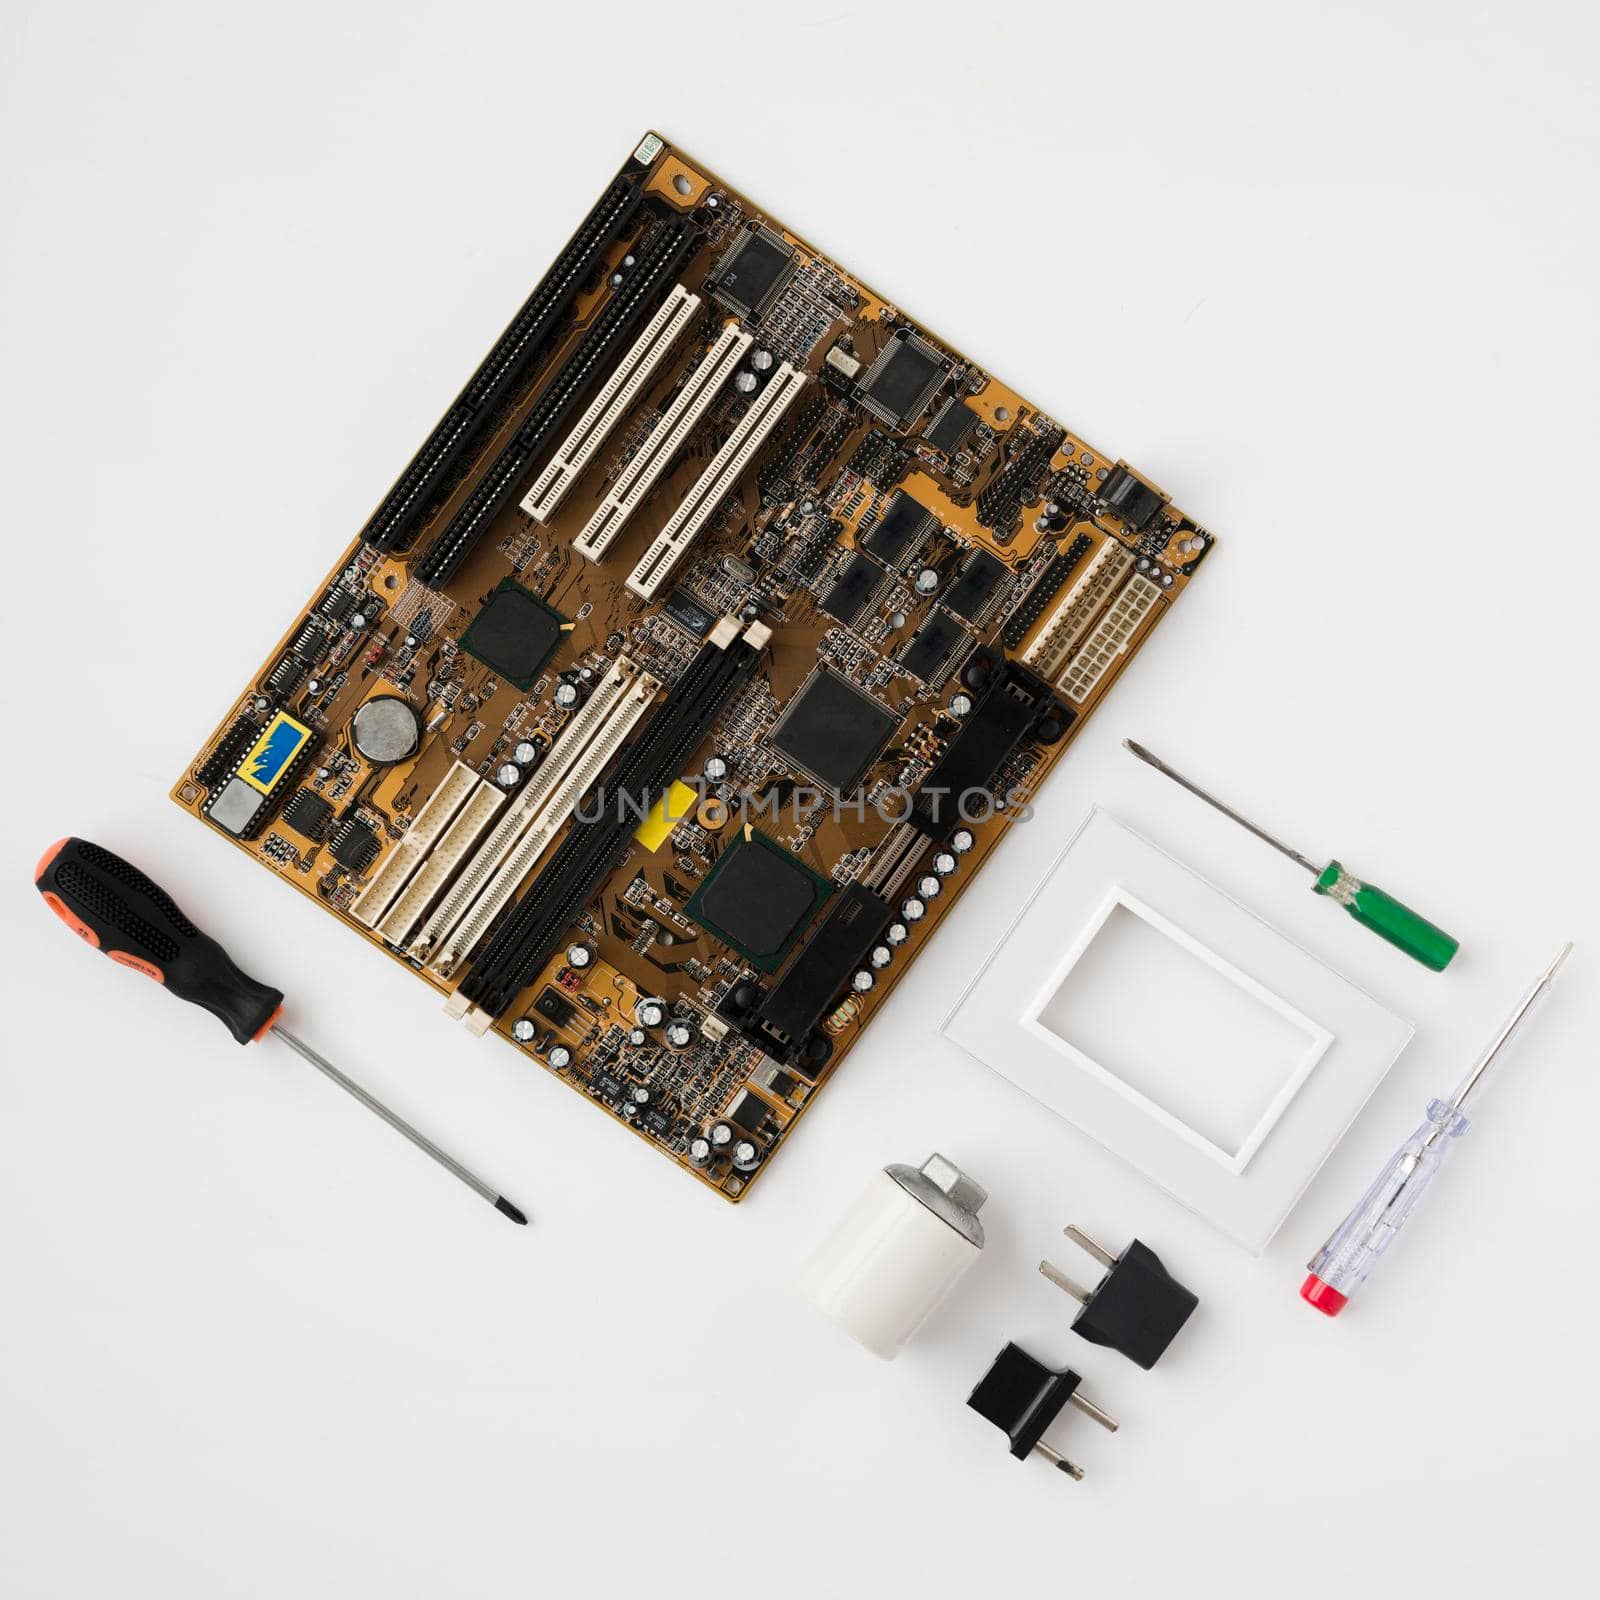 top view circuit board electrical equipment white surface. High quality photo by Zahard